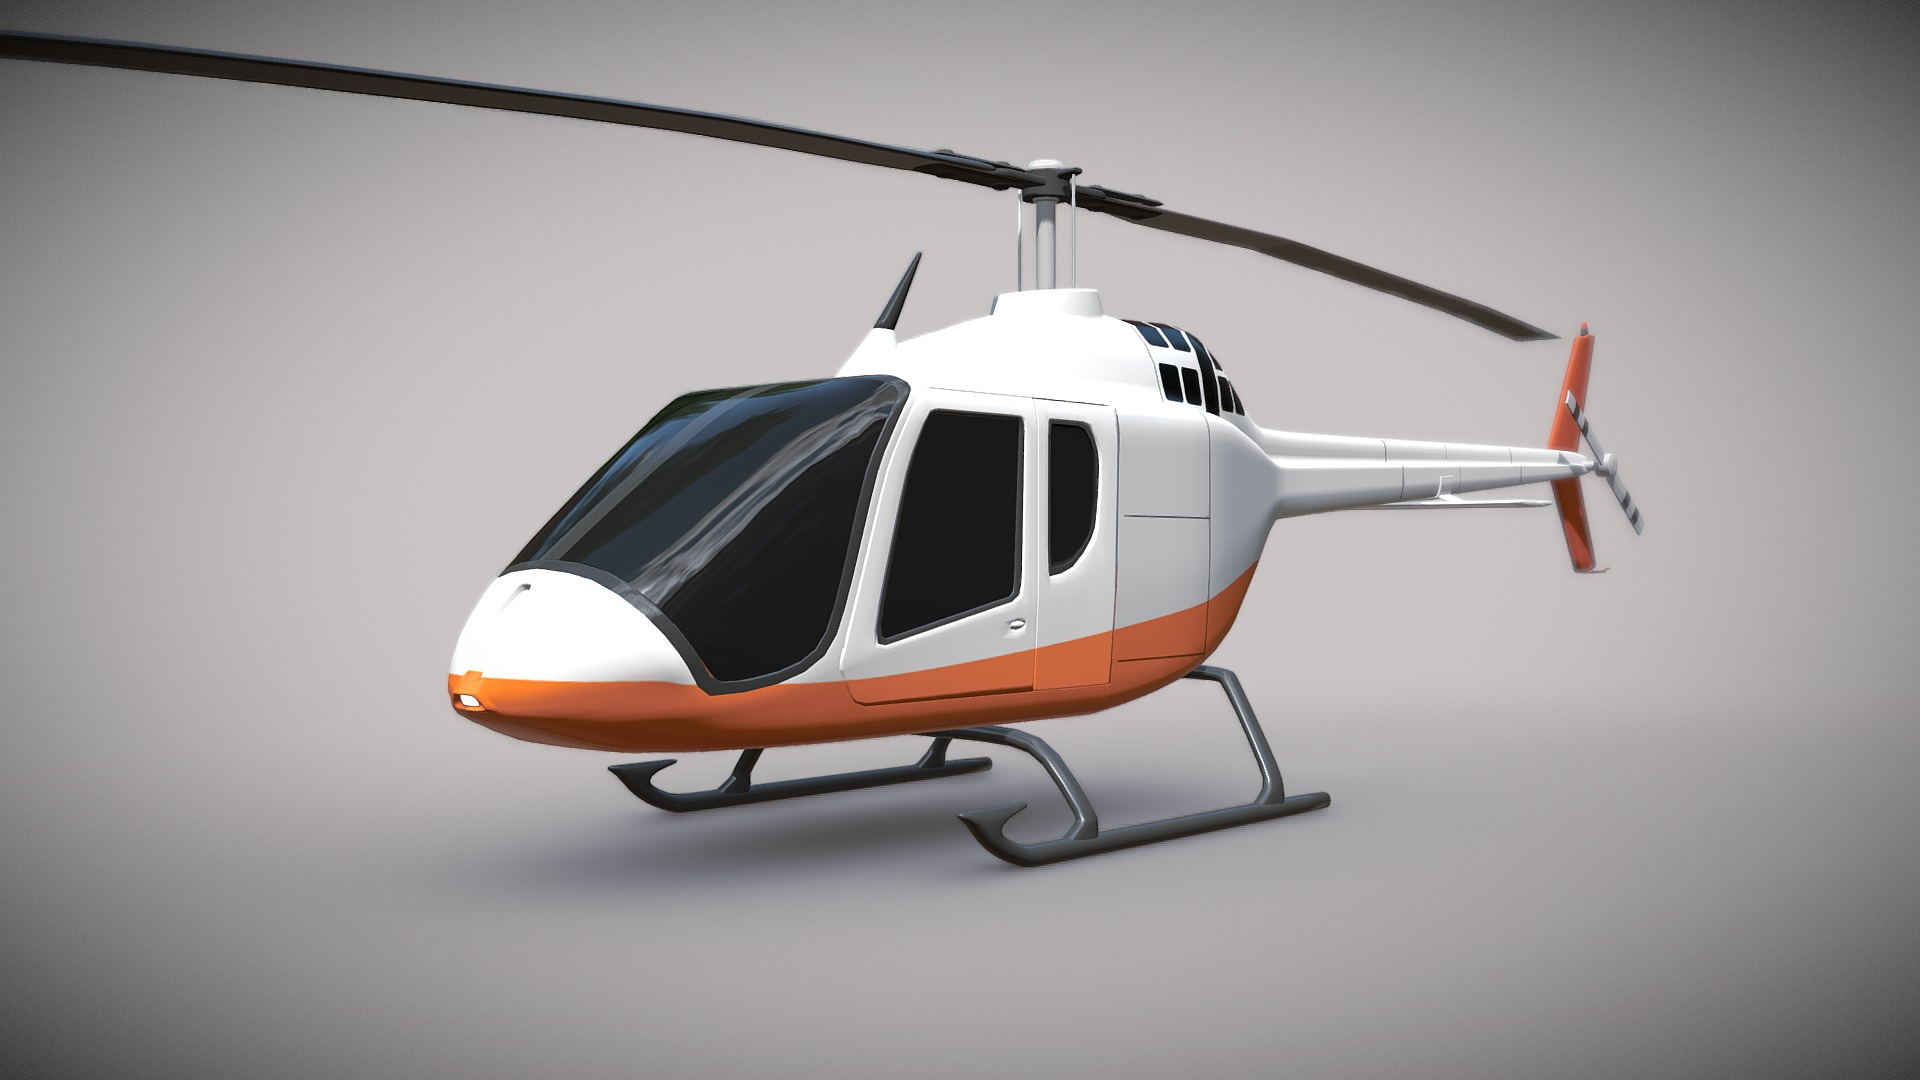 3D model Bell 505 Jet Ranger X private helicopter - This is a 3D model of the Bell 505 Jet Ranger X private helicopter. The 3D model is about a white and orange helicopter.